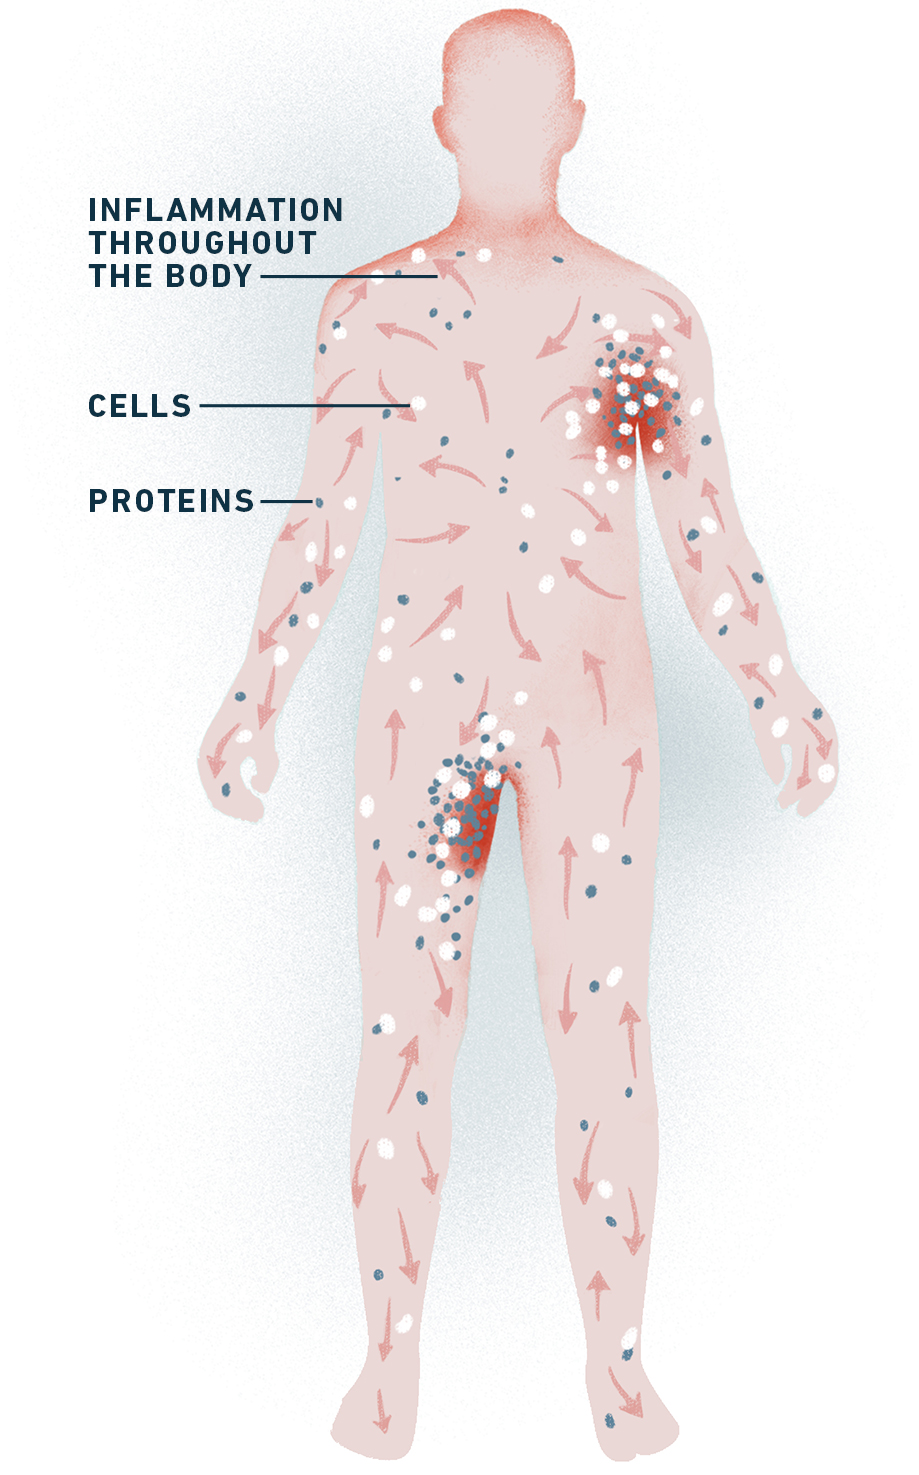 Diagram of a body showing inflammation throughout the body, cells, and proteins